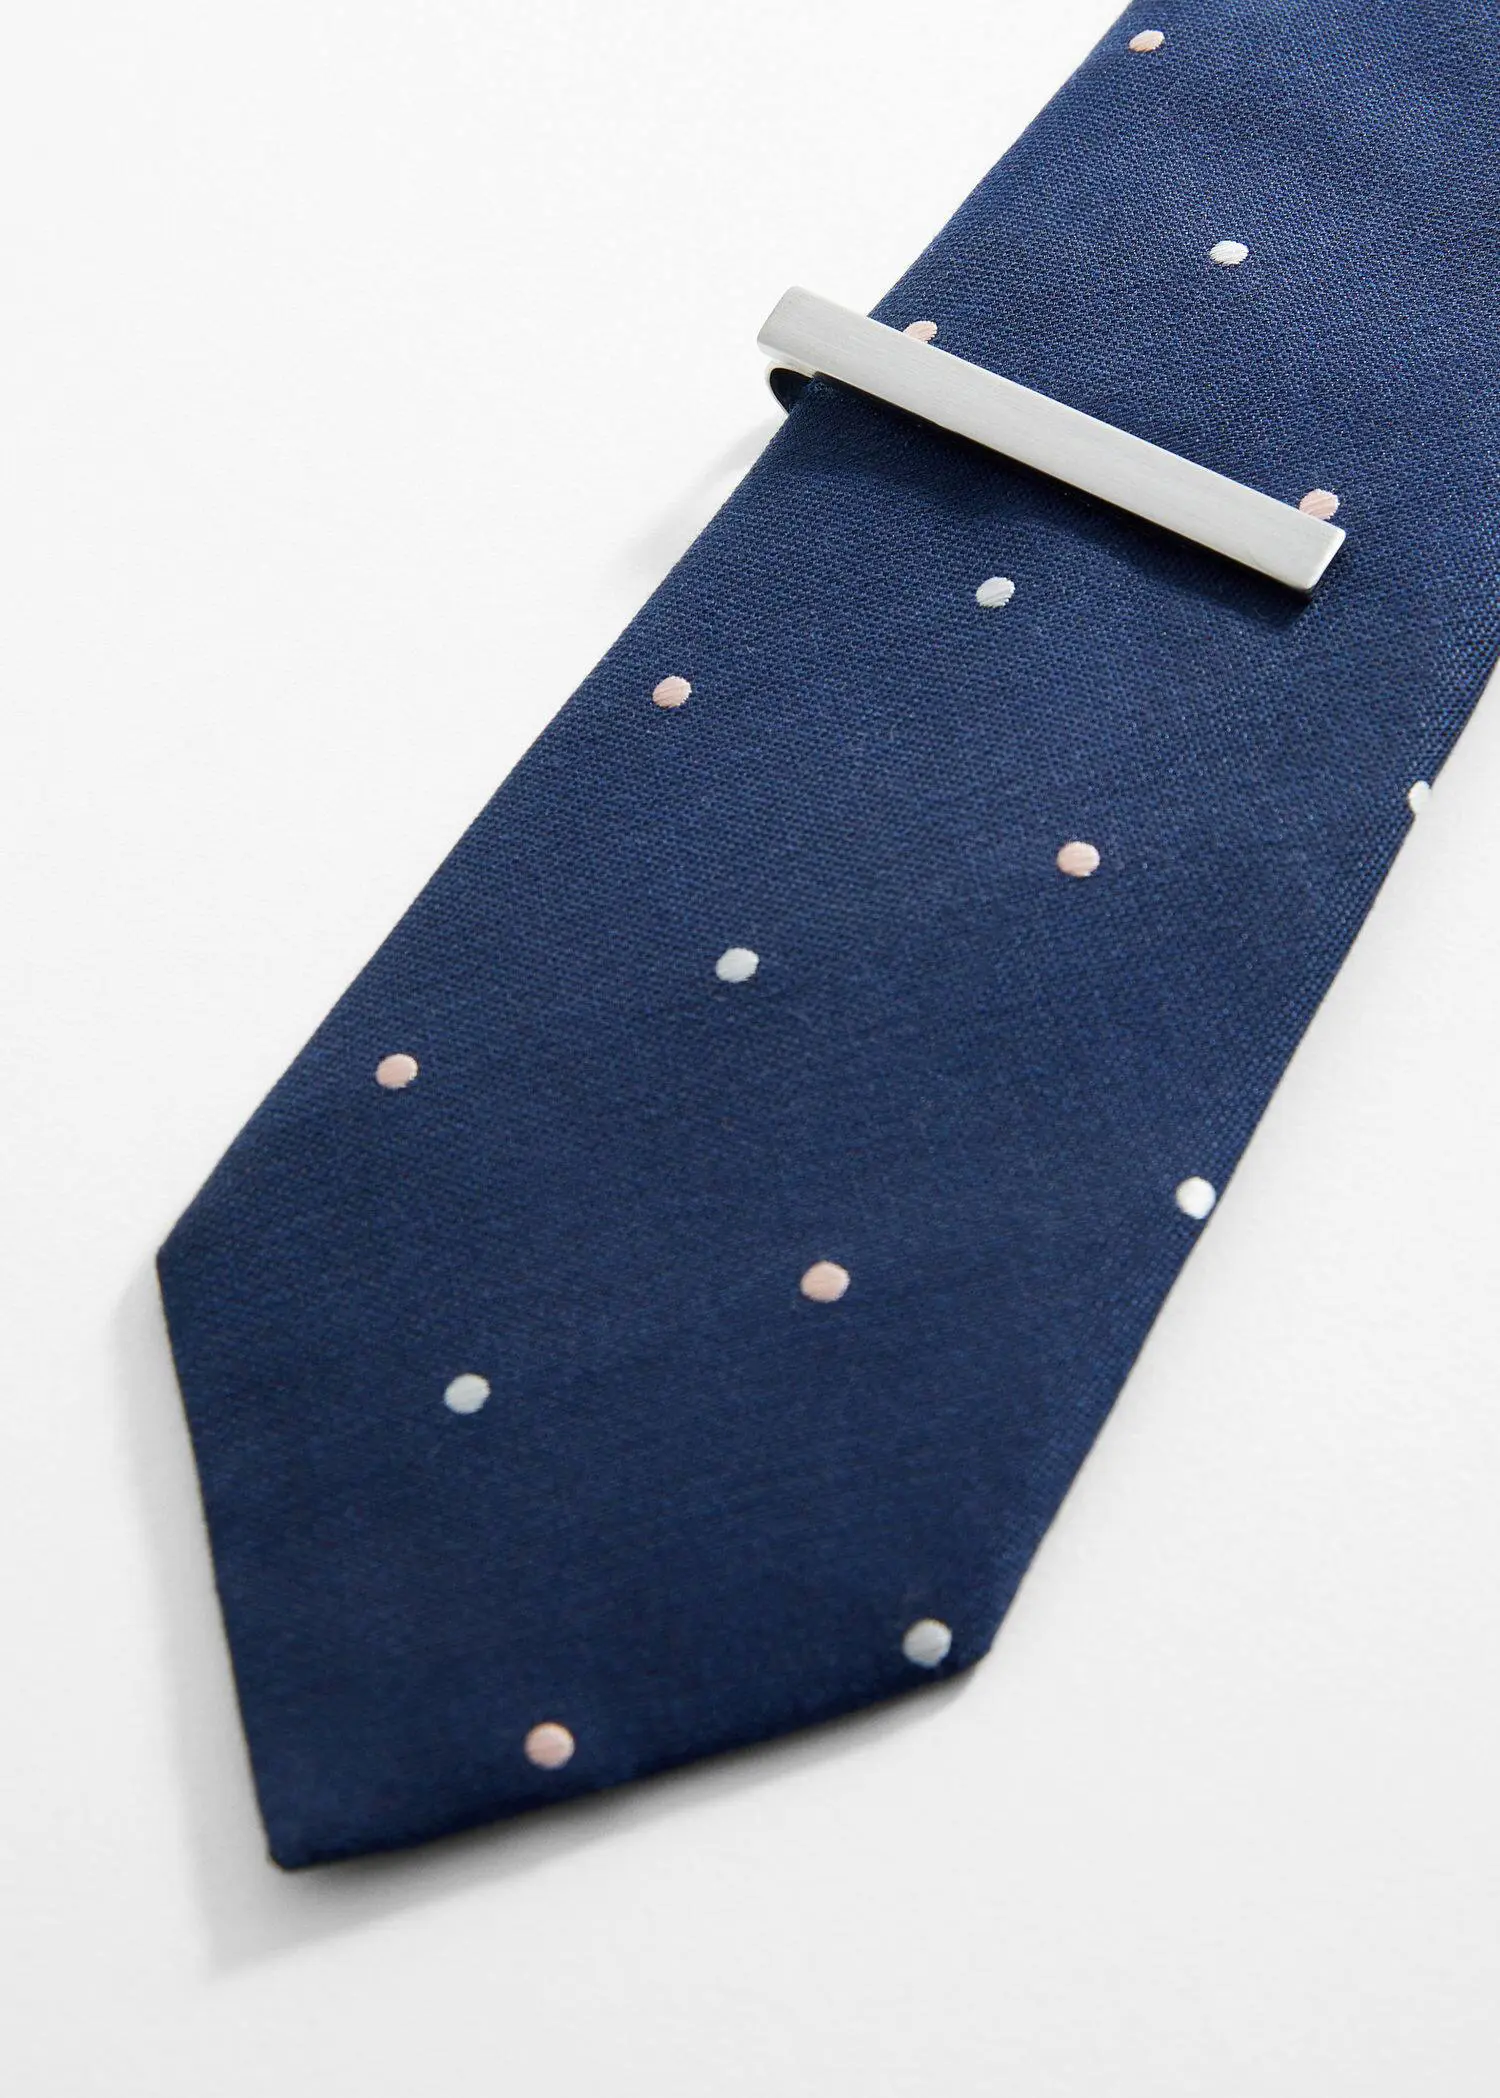 Mango Metal tie clip. a blue tie with white polka dots on it. 